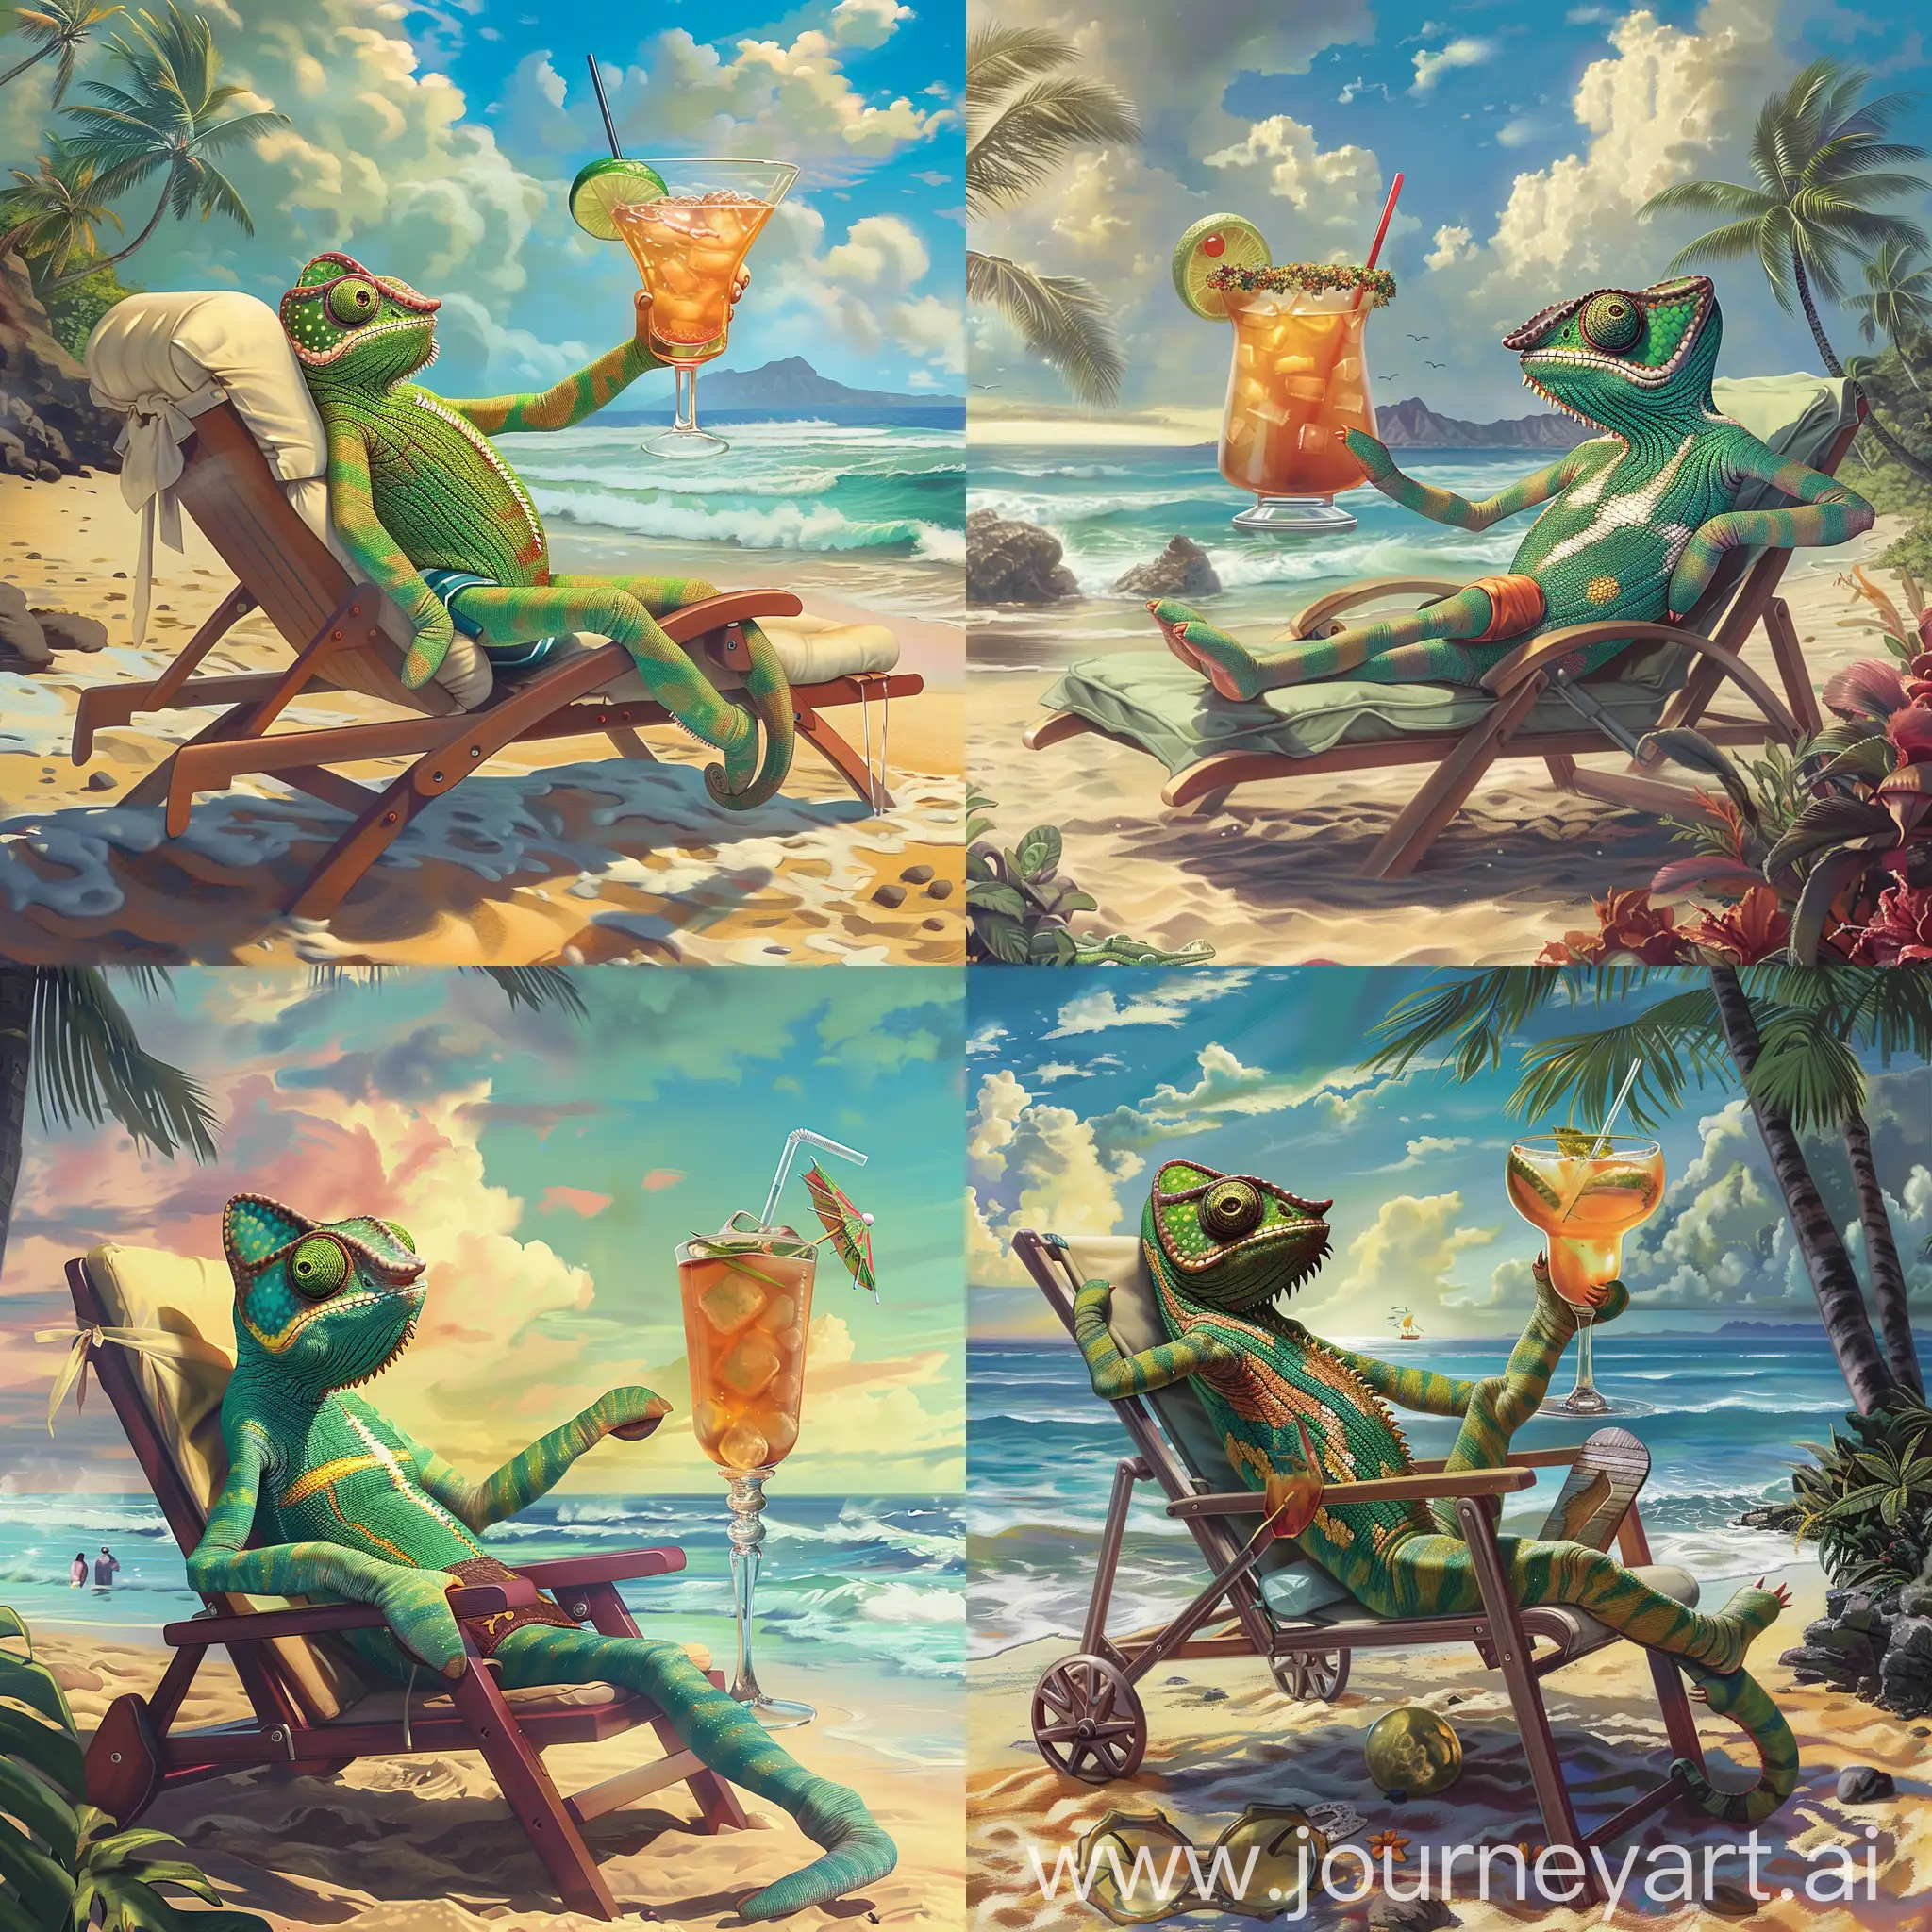 A chameleon with swimming trunks laying on an Hawaii beach in a lounge chair with a large cocktail 